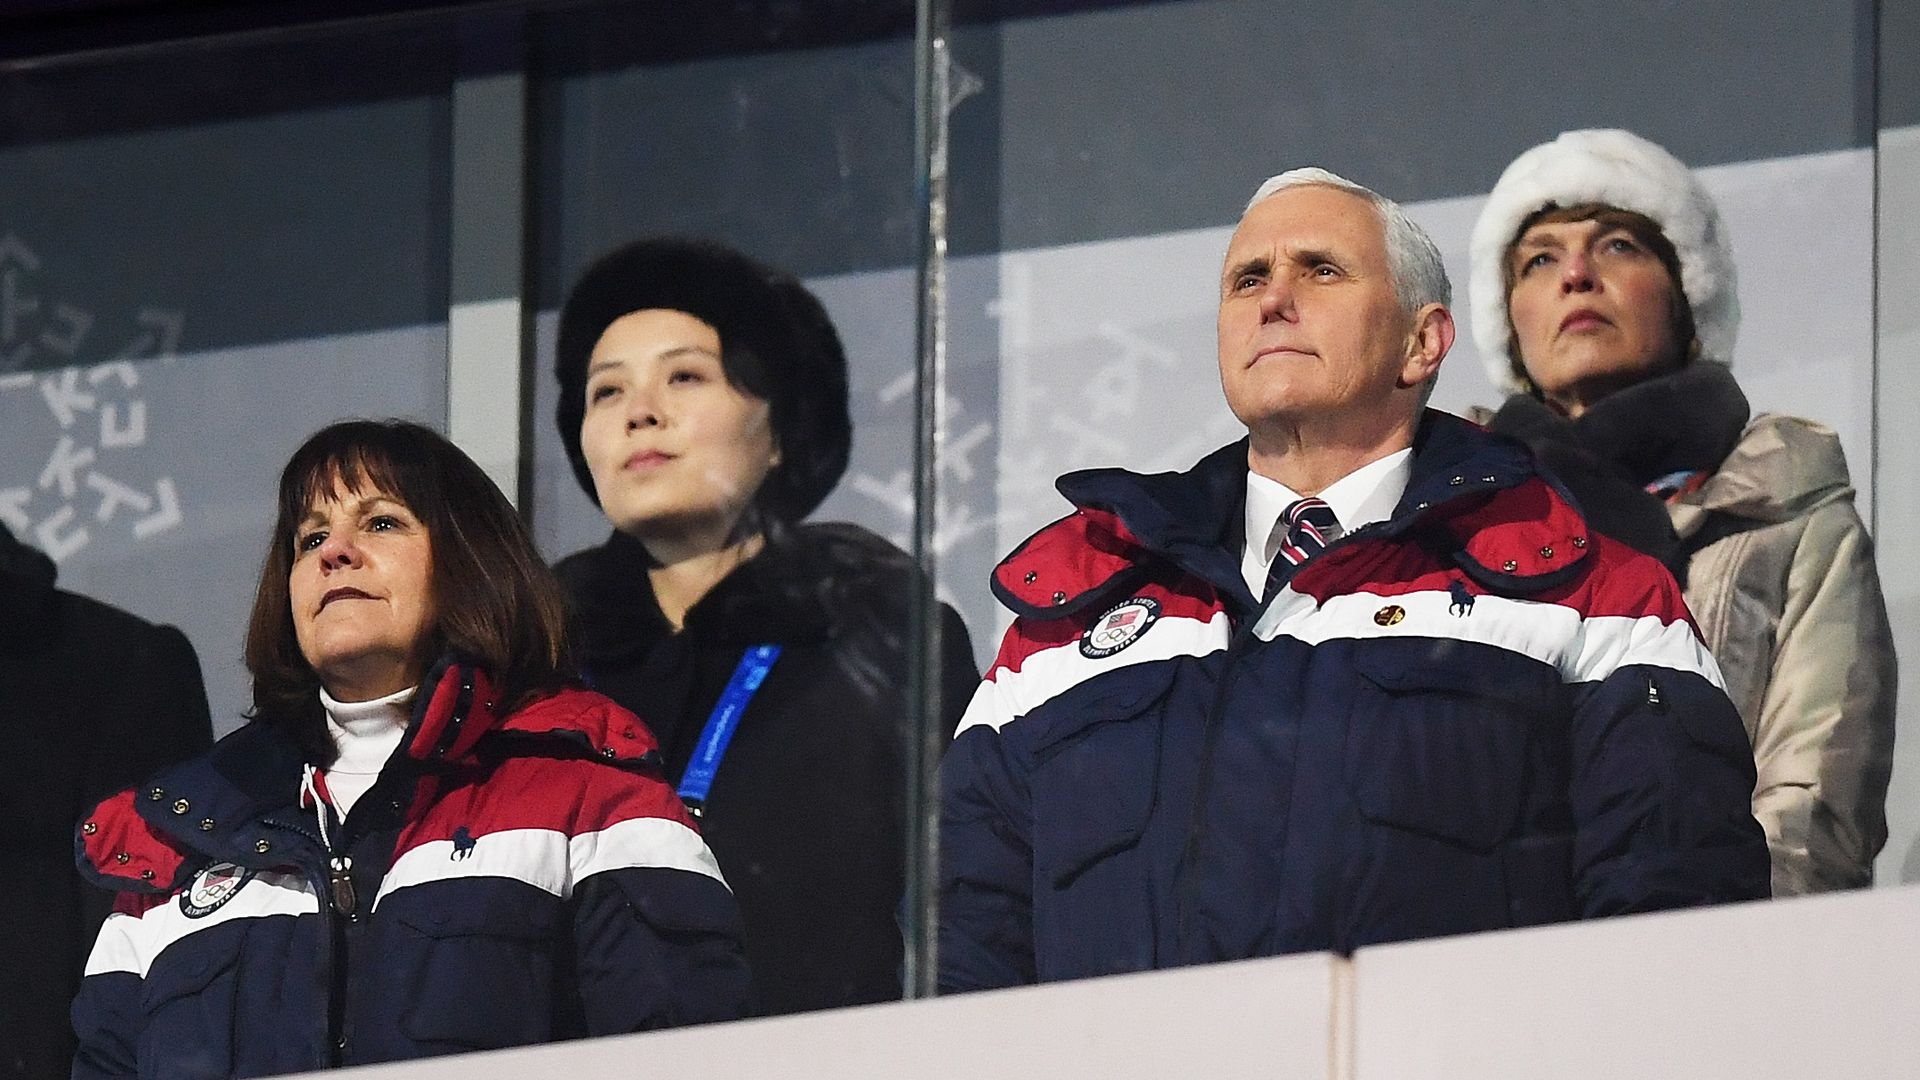 Mike Pence at the Winter Olympics in South Korea